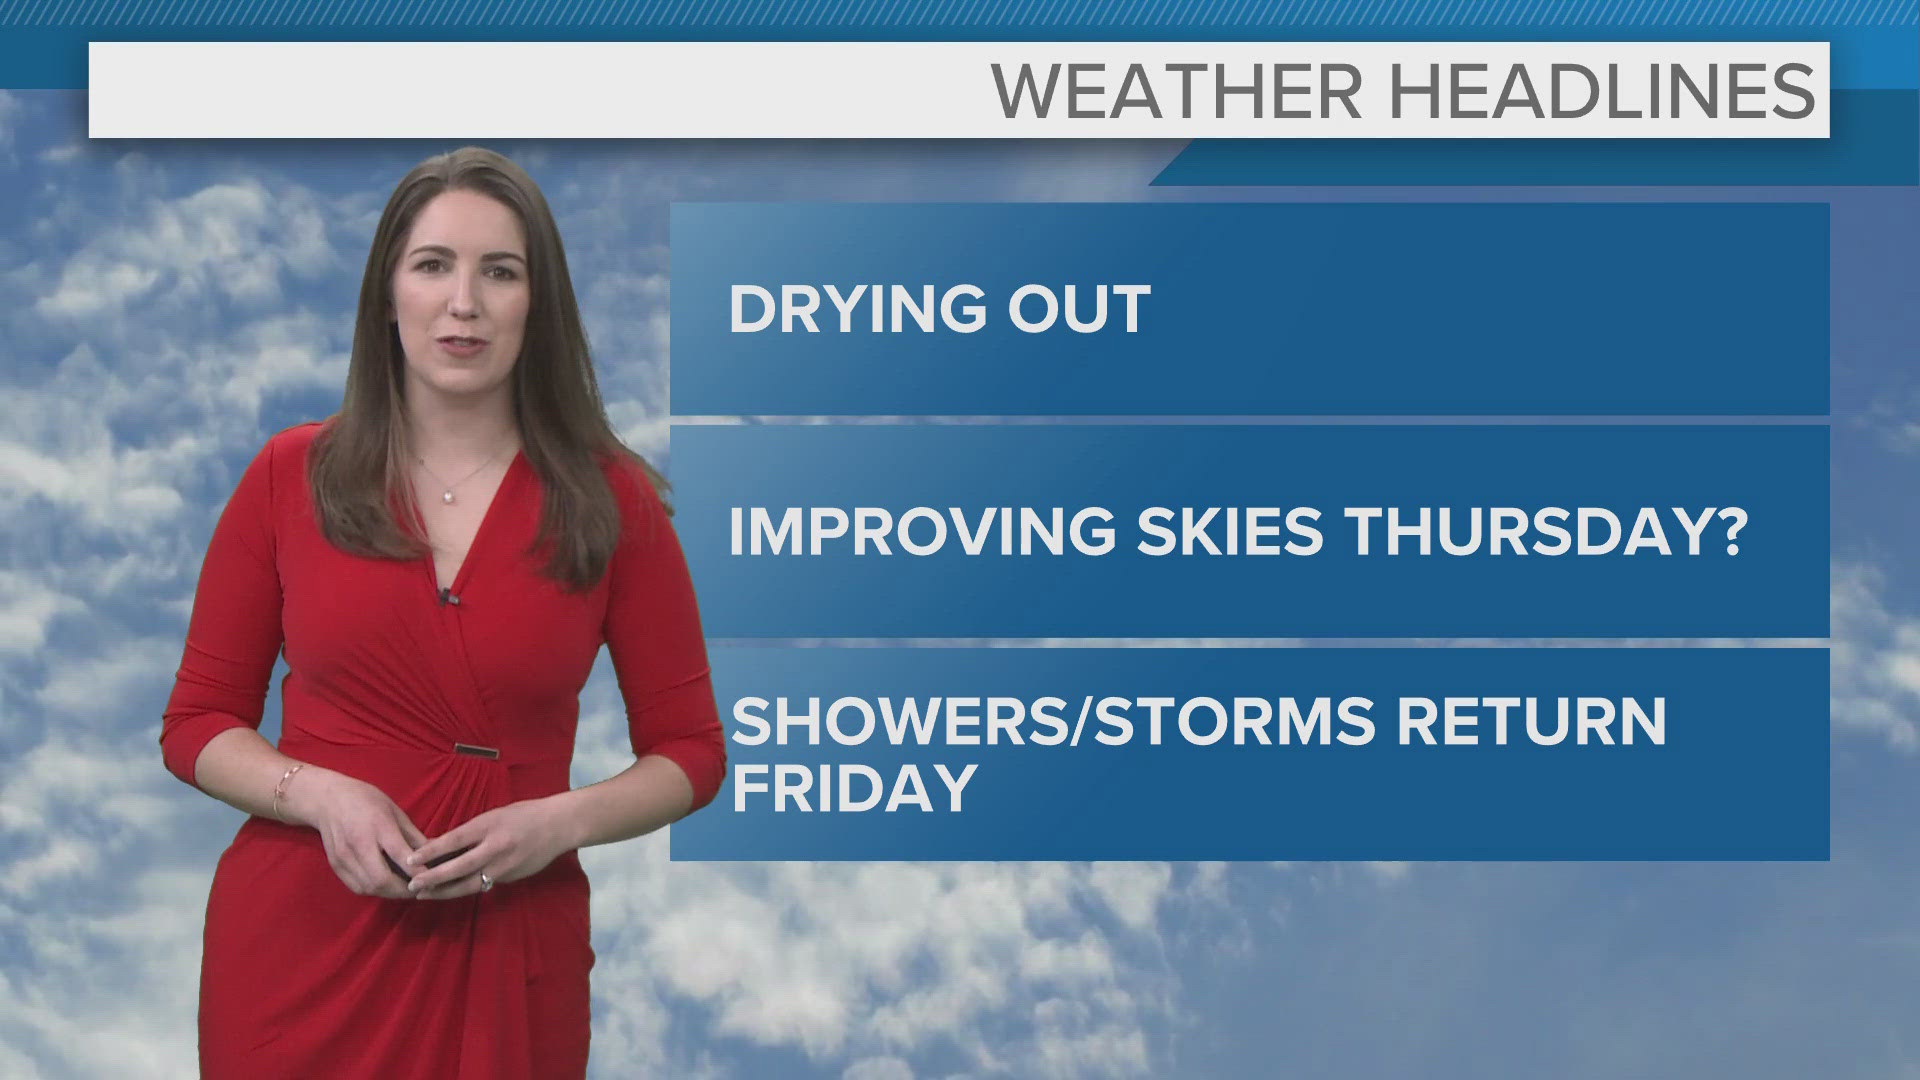 Dry weather returns Thursday before storms arrive Friday.